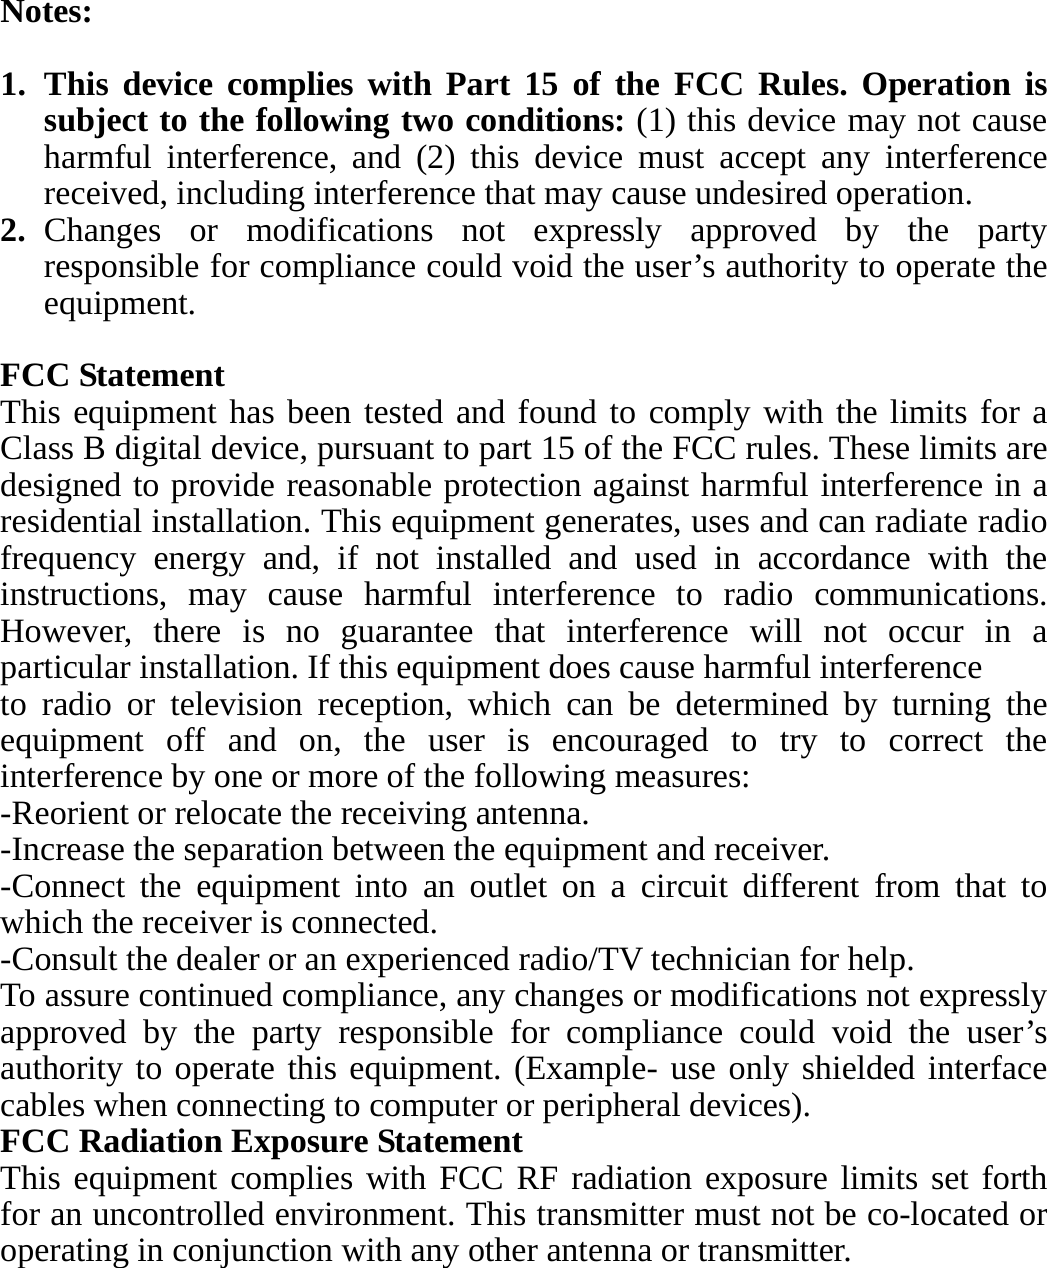 Notes:  1. This device complies with Part 15 of the FCC Rules. Operation is subject to the following two conditions: (1) this device may not cause harmful interference, and (2) this device must accept any interference received, including interference that may cause undesired operation. 2. Changes or modifications not expressly approved by the party responsible for compliance could void the user’s authority to operate the equipment.  FCC Statement This equipment has been tested and found to comply with the limits for a Class B digital device, pursuant to part 15 of the FCC rules. These limits are designed to provide reasonable protection against harmful interference in a residential installation. This equipment generates, uses and can radiate radio frequency energy and, if not installed and used in accordance with the instructions, may cause harmful interference to radio communications. However, there is no guarantee that interference will not occur in a particular installation. If this equipment does cause harmful interference   to radio or television reception, which can be determined by turning the equipment off and on, the user is encouraged to try to correct the interference by one or more of the following measures: -Reorient or relocate the receiving antenna. -Increase the separation between the equipment and receiver. -Connect the equipment into an outlet on a circuit different from that to which the receiver is connected. -Consult the dealer or an experienced radio/TV technician for help. To assure continued compliance, any changes or modifications not expressly approved by the party responsible for compliance could void the user’s authority to operate this equipment. (Example- use only shielded interface cables when connecting to computer or peripheral devices). FCC Radiation Exposure Statement       This equipment complies with FCC RF radiation exposure limits set forth for an uncontrolled environment. This transmitter must not be co-located or operating in conjunction with any other antenna or transmitter. 